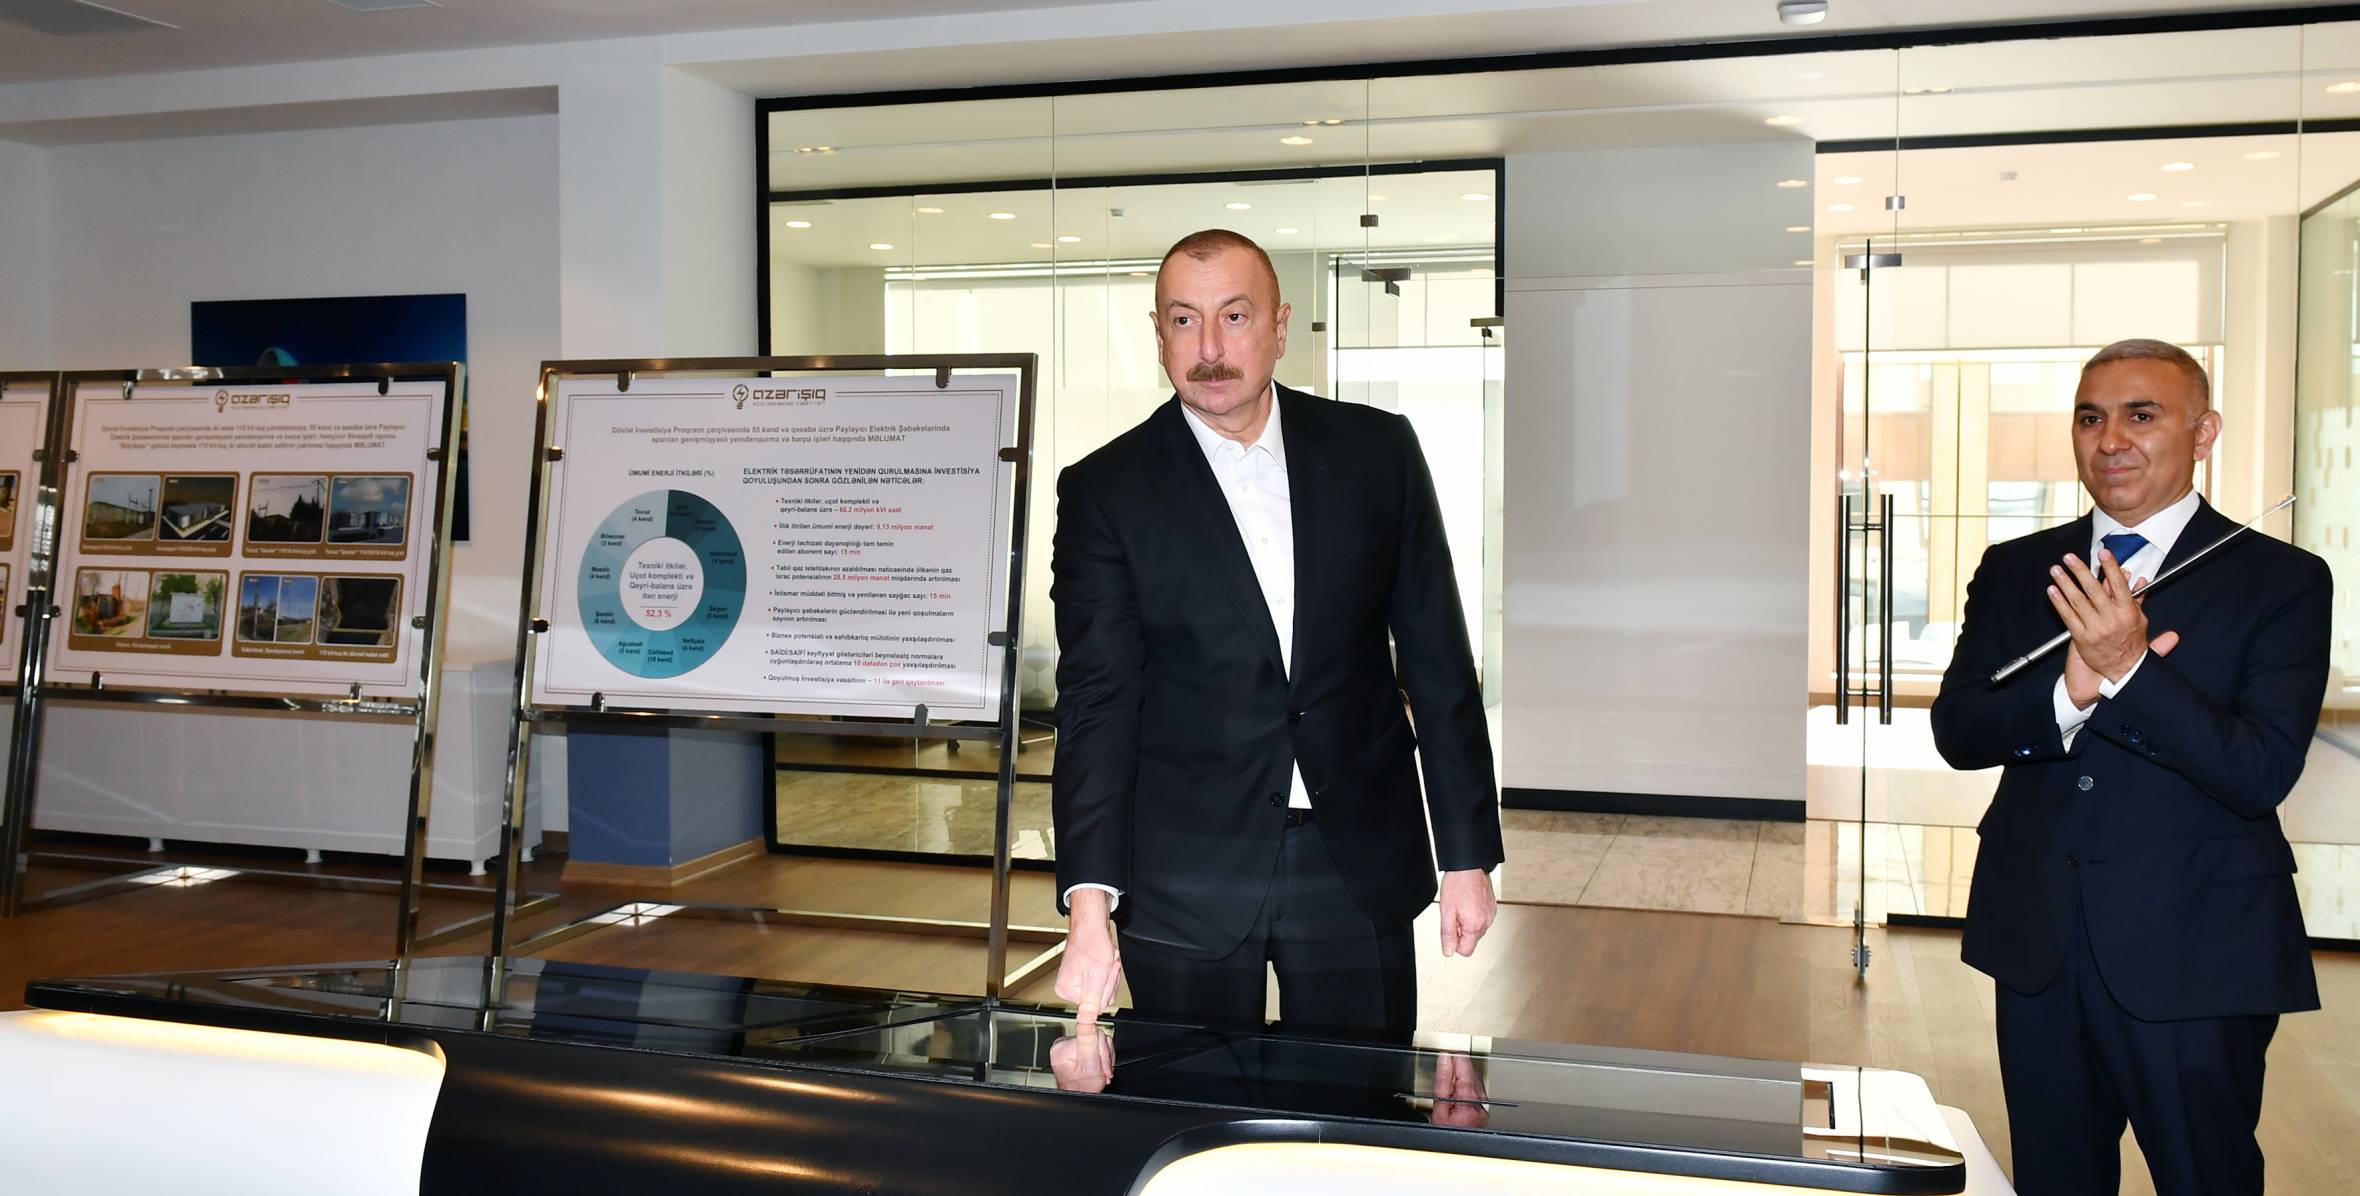 Ilham Aliyev attended opening of new power substation and Digital Network General Management Center